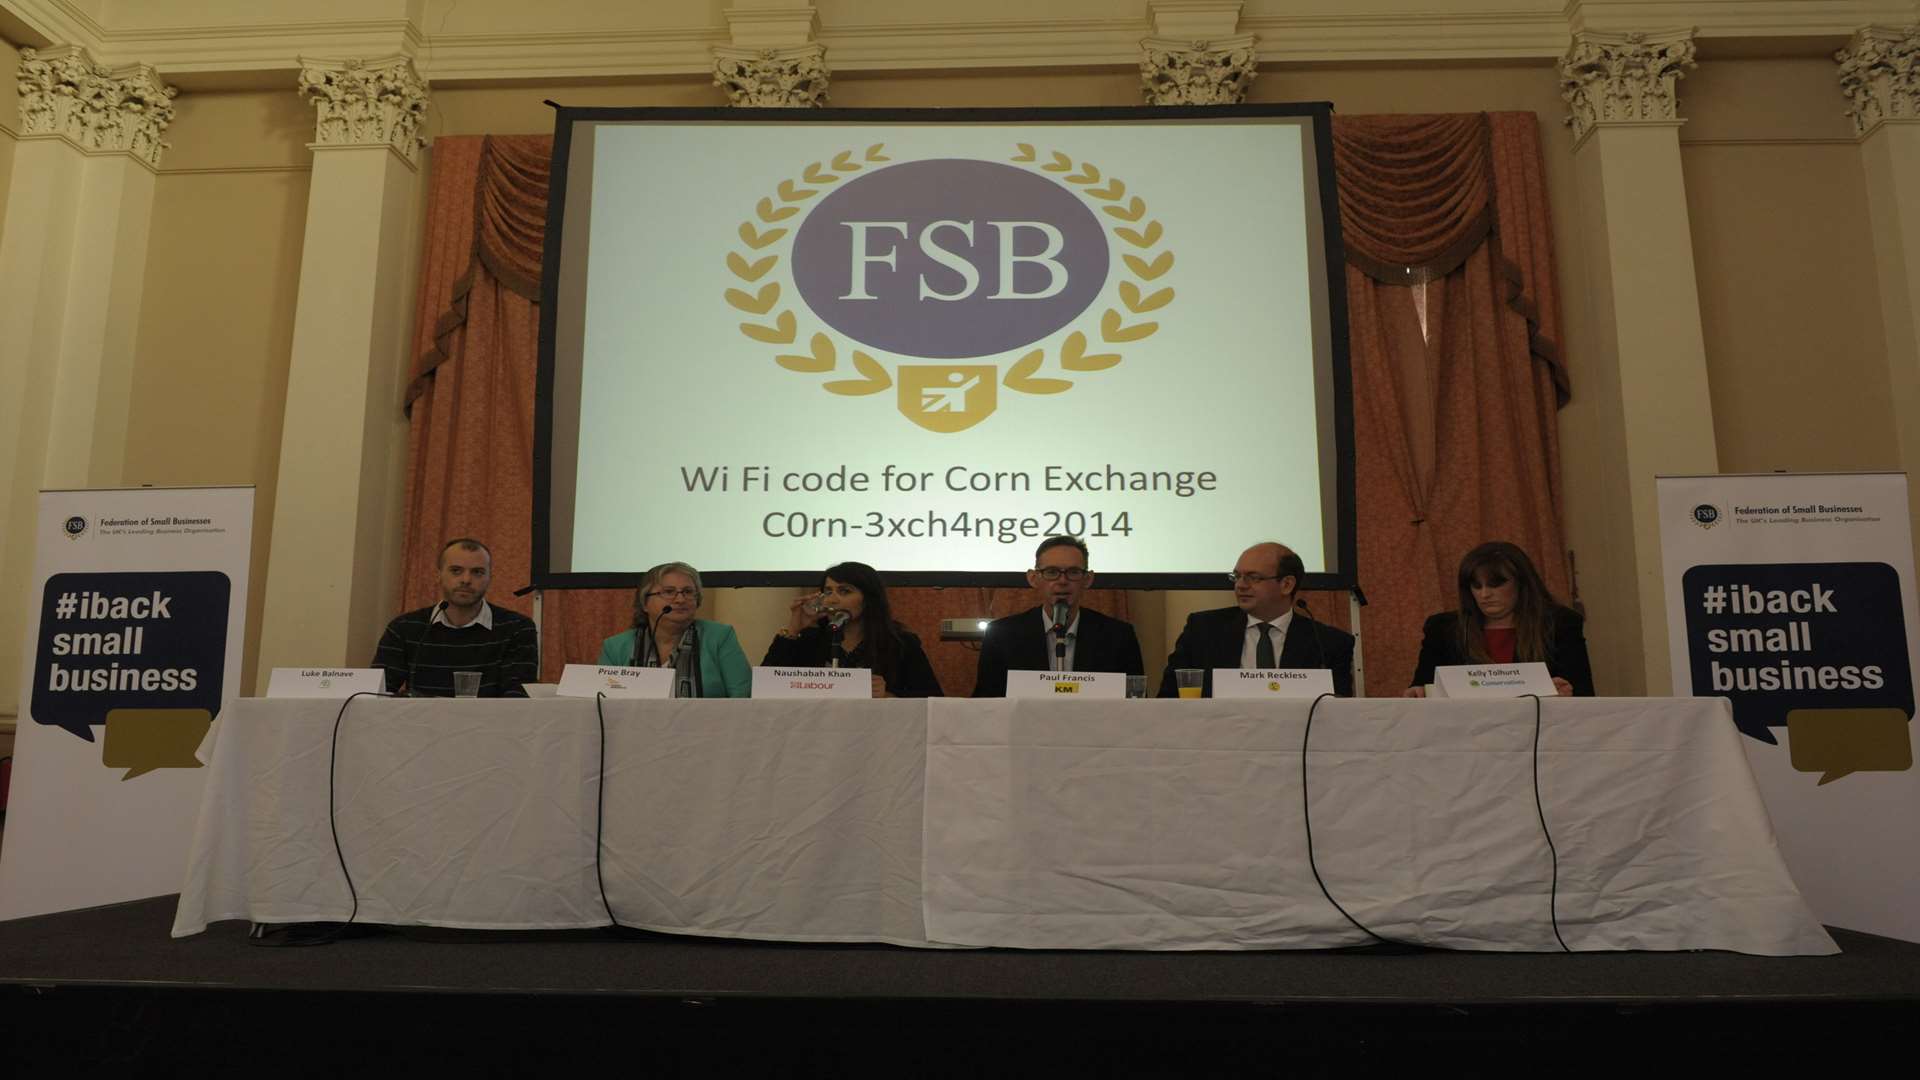 The hustings at the Corn Exchange, Rochester, hosted by the FSB, featured, from left, Luke Balnave (Green), Prue Bray (Lib Dem), Naushabah Khan (Lab), Paul Francis (chair), Mark Reckless (Ukip) and Kelly Tollhurst (Con)